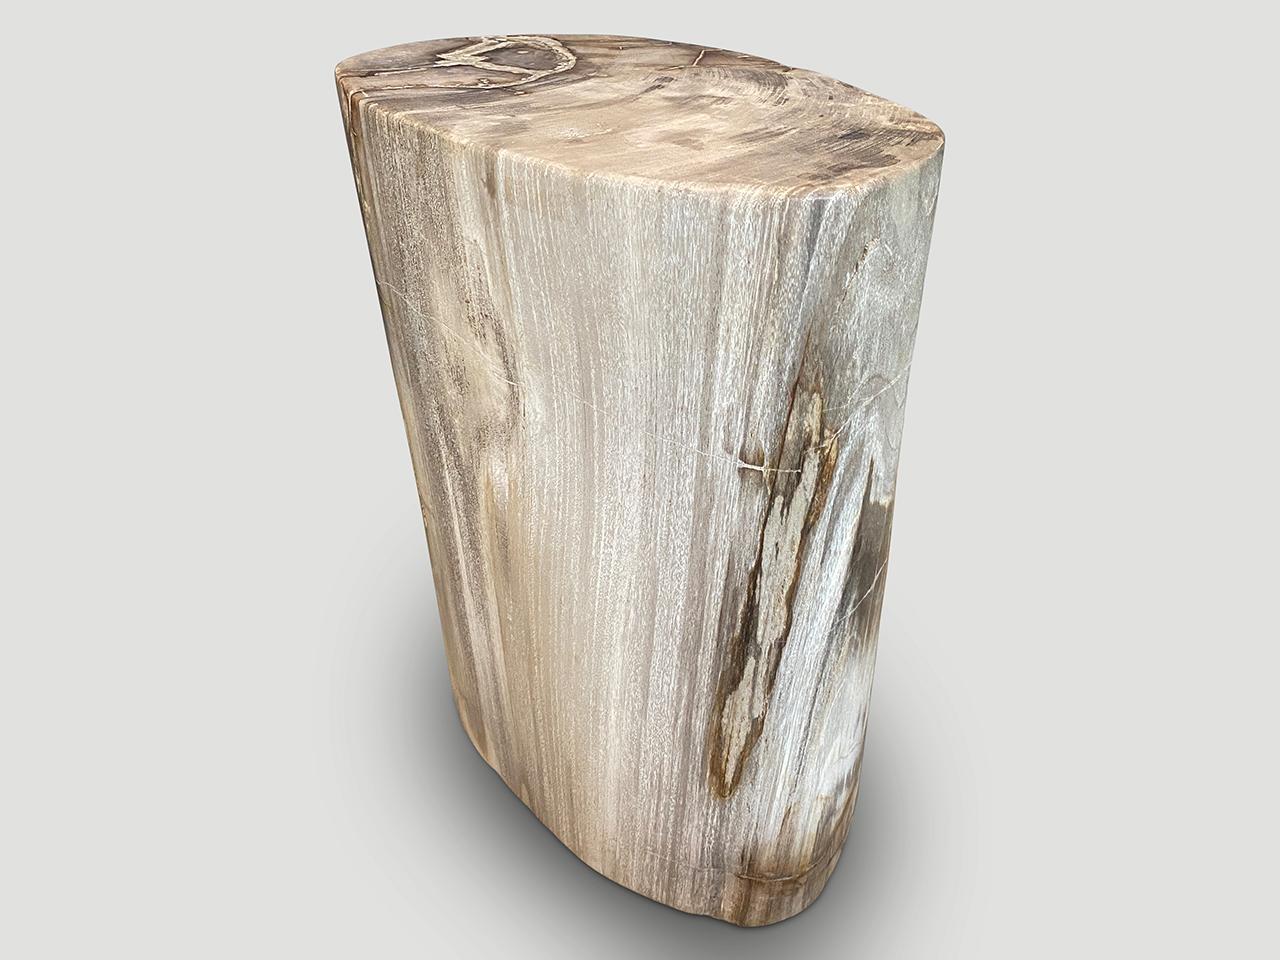 Andrianna Shamaris Exquisite High Quality Petrified Wood Side Table or Pedestal 2